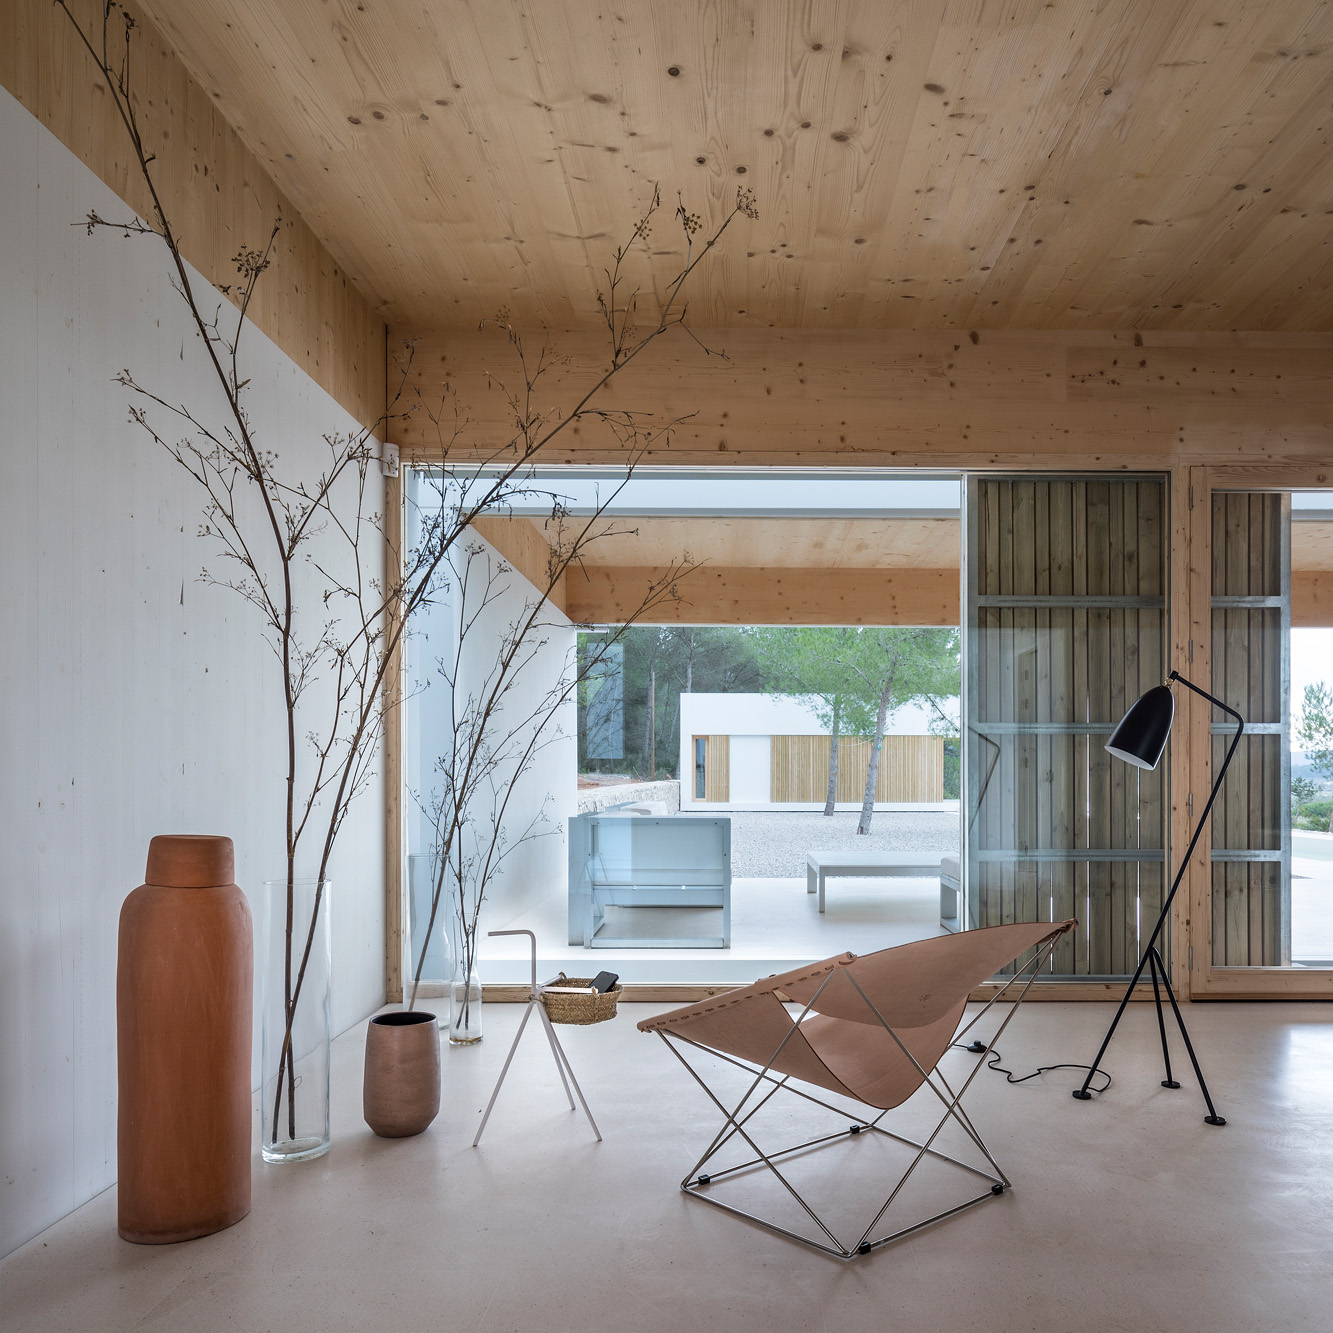 Interiors of Cal Amo designed by Maria Castell